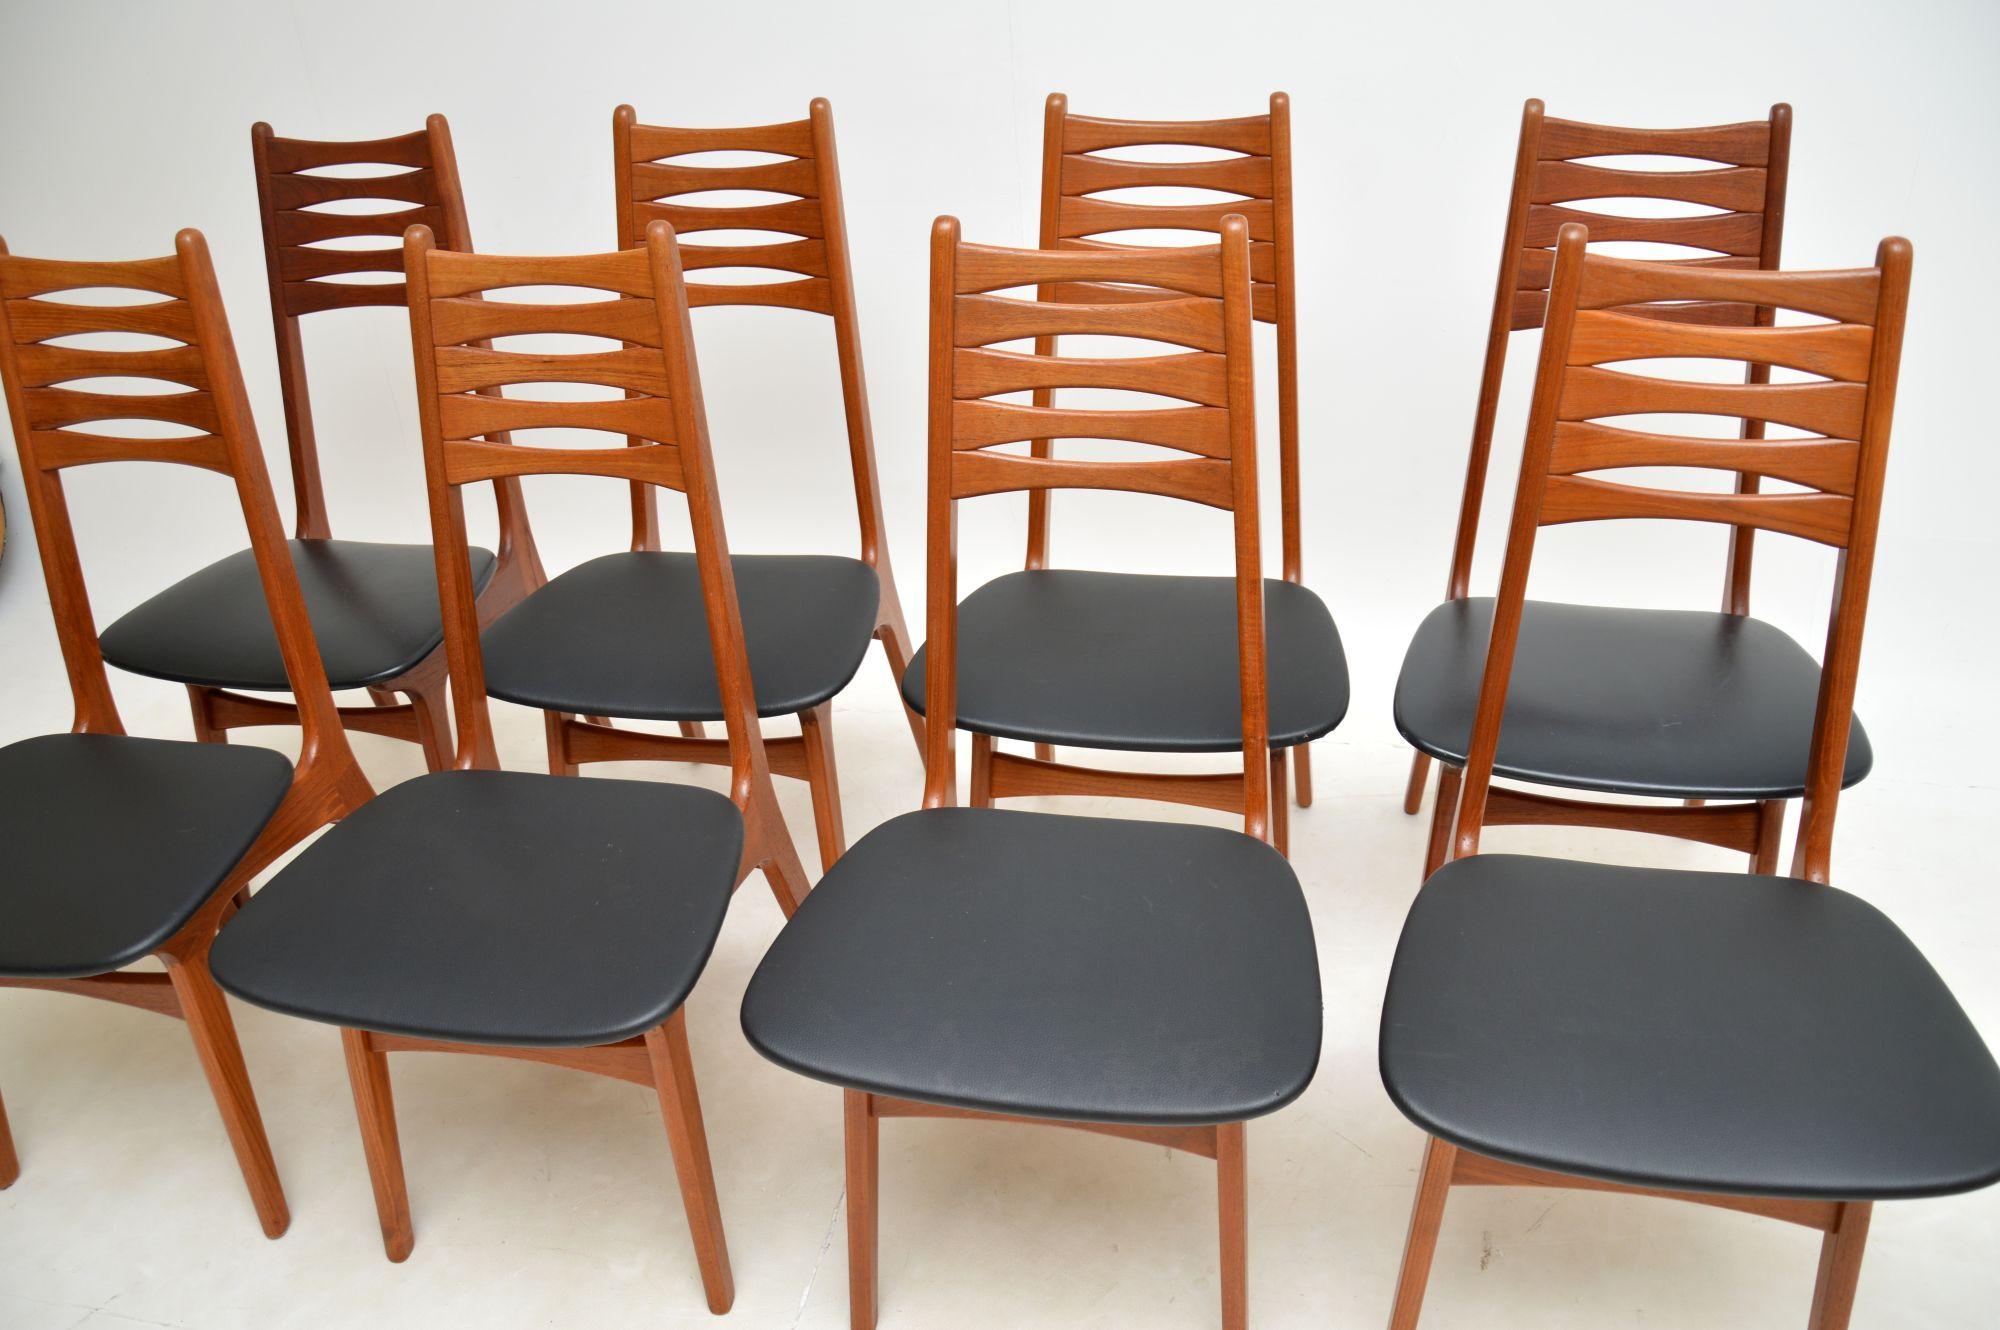 1960s Set of 8 Danish Teak Vintage Dining Chairs In Good Condition For Sale In London, GB